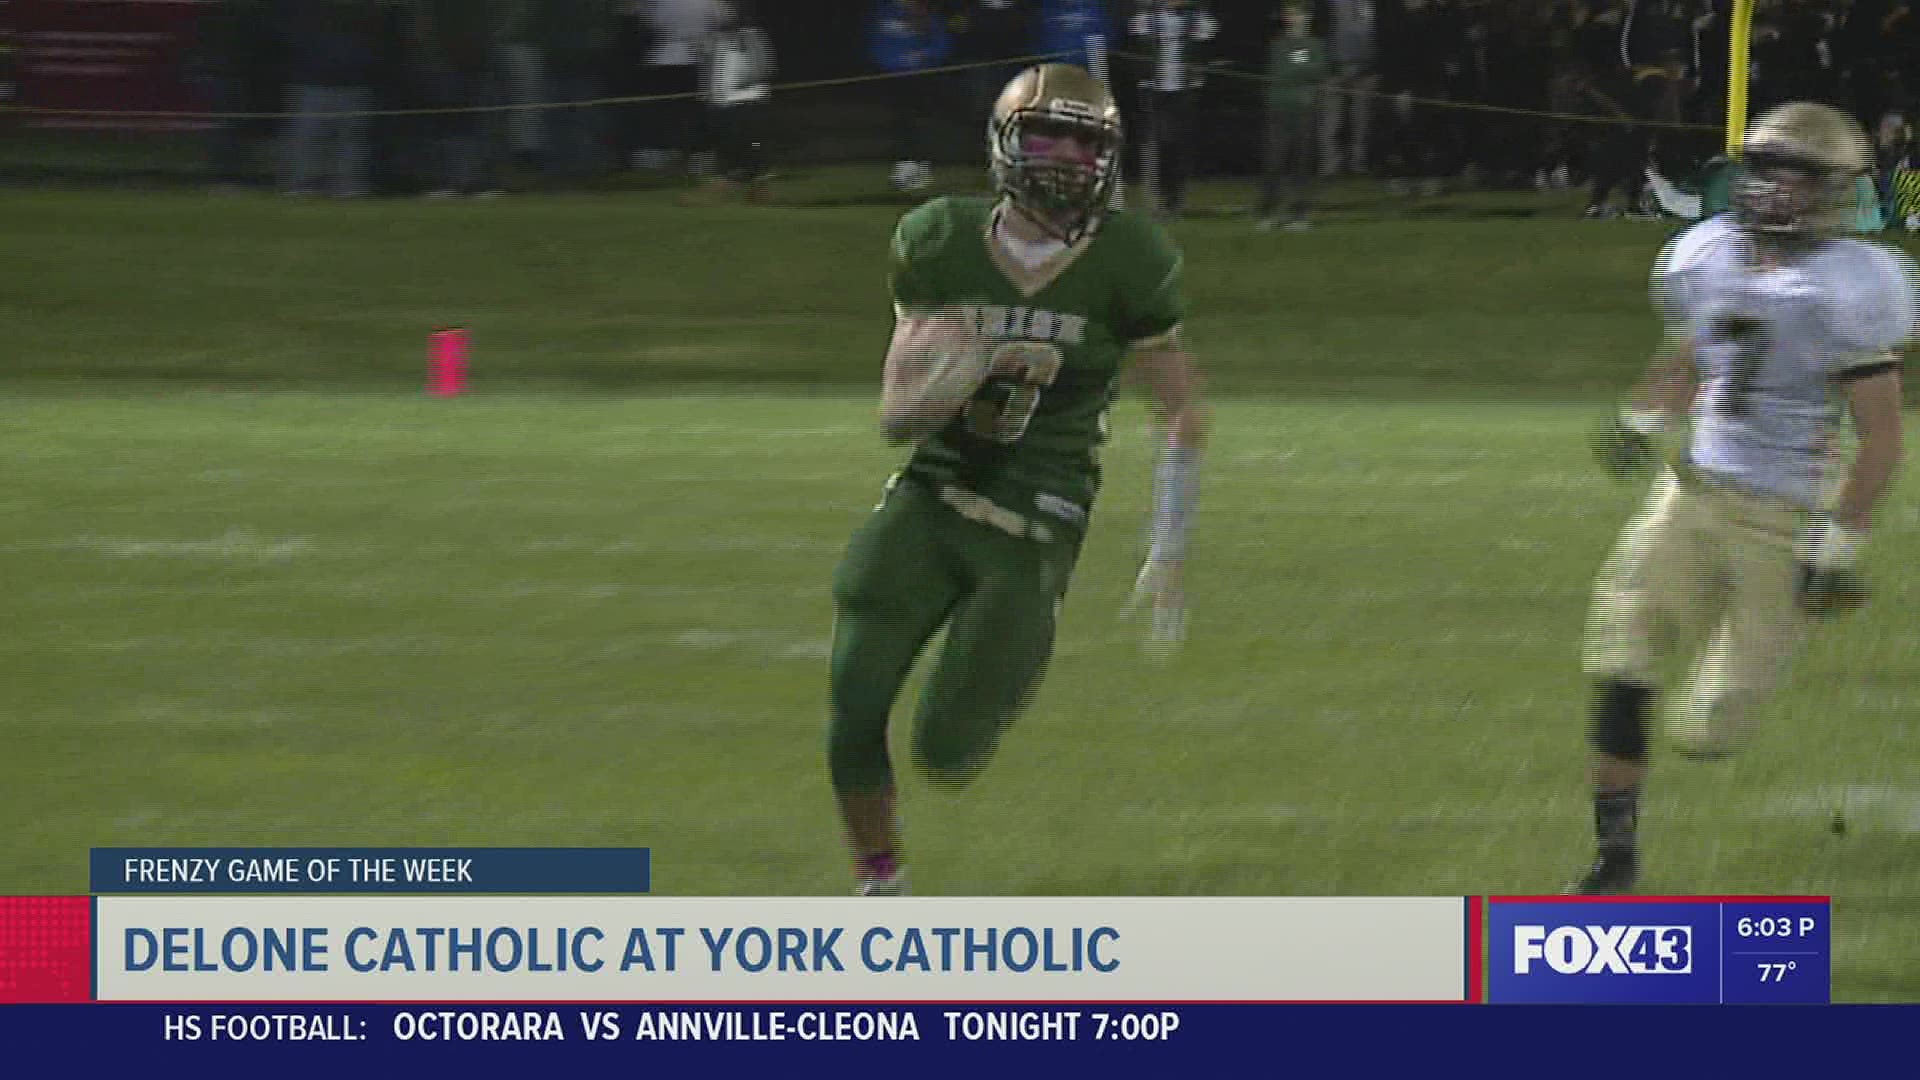 HSFF Game of the Week Preview: Delone Catholic at York Catholic